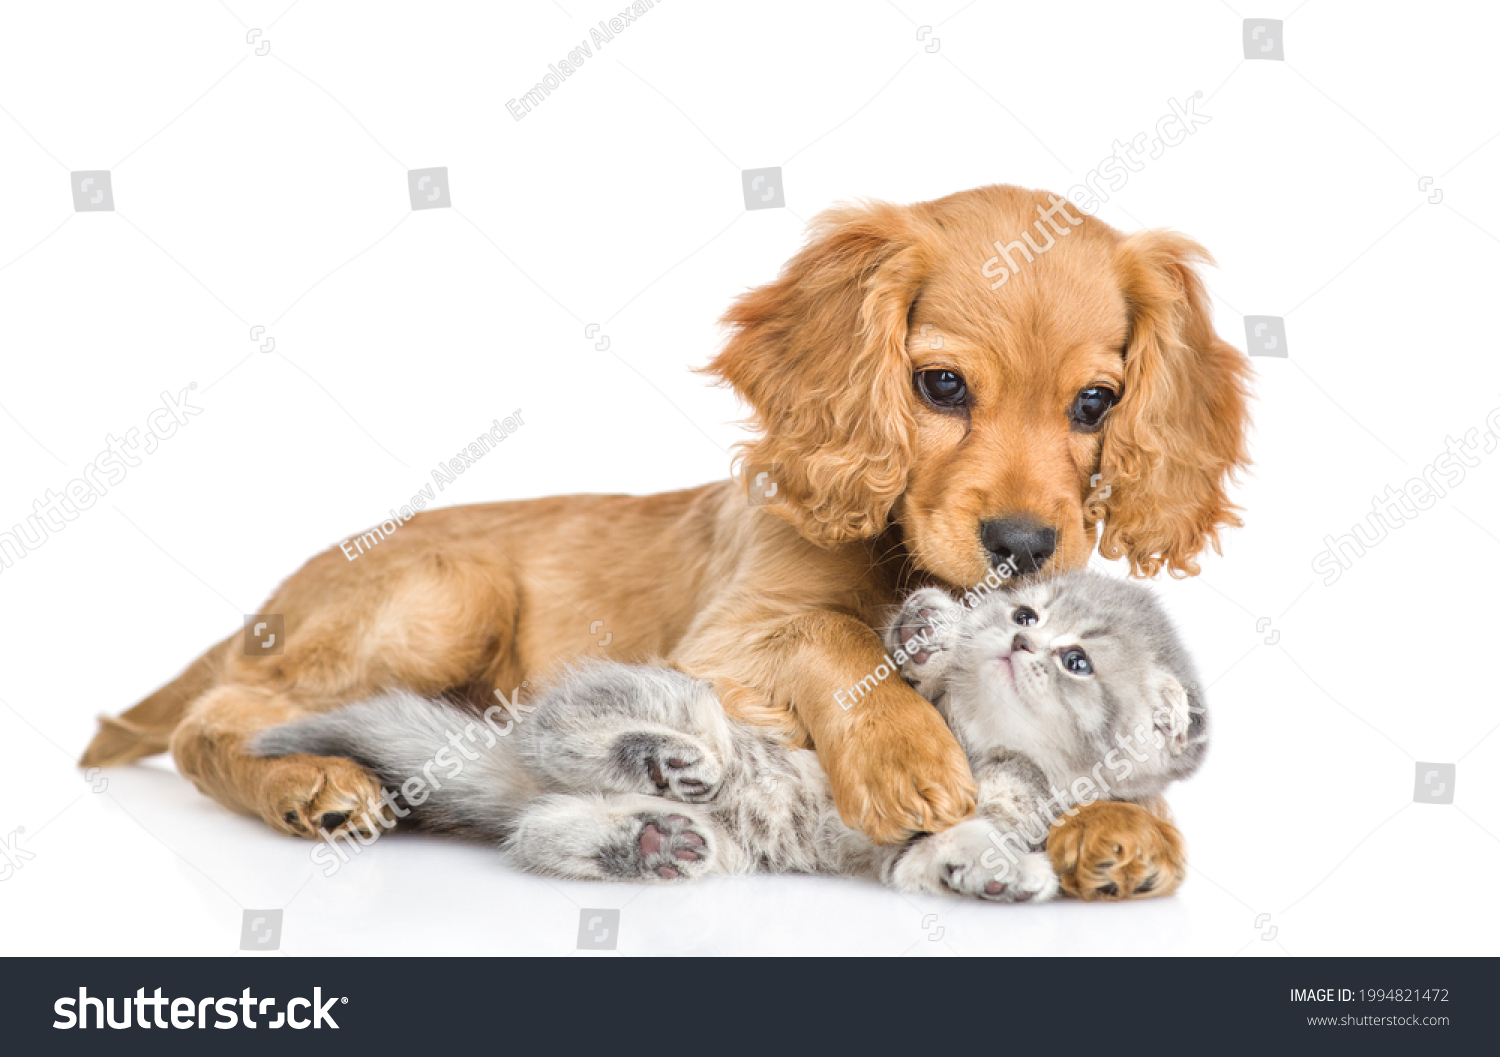 Playful English cocker spaniel puppy hugs and kisses  gray baby kitten. isolated on white background #1994821472